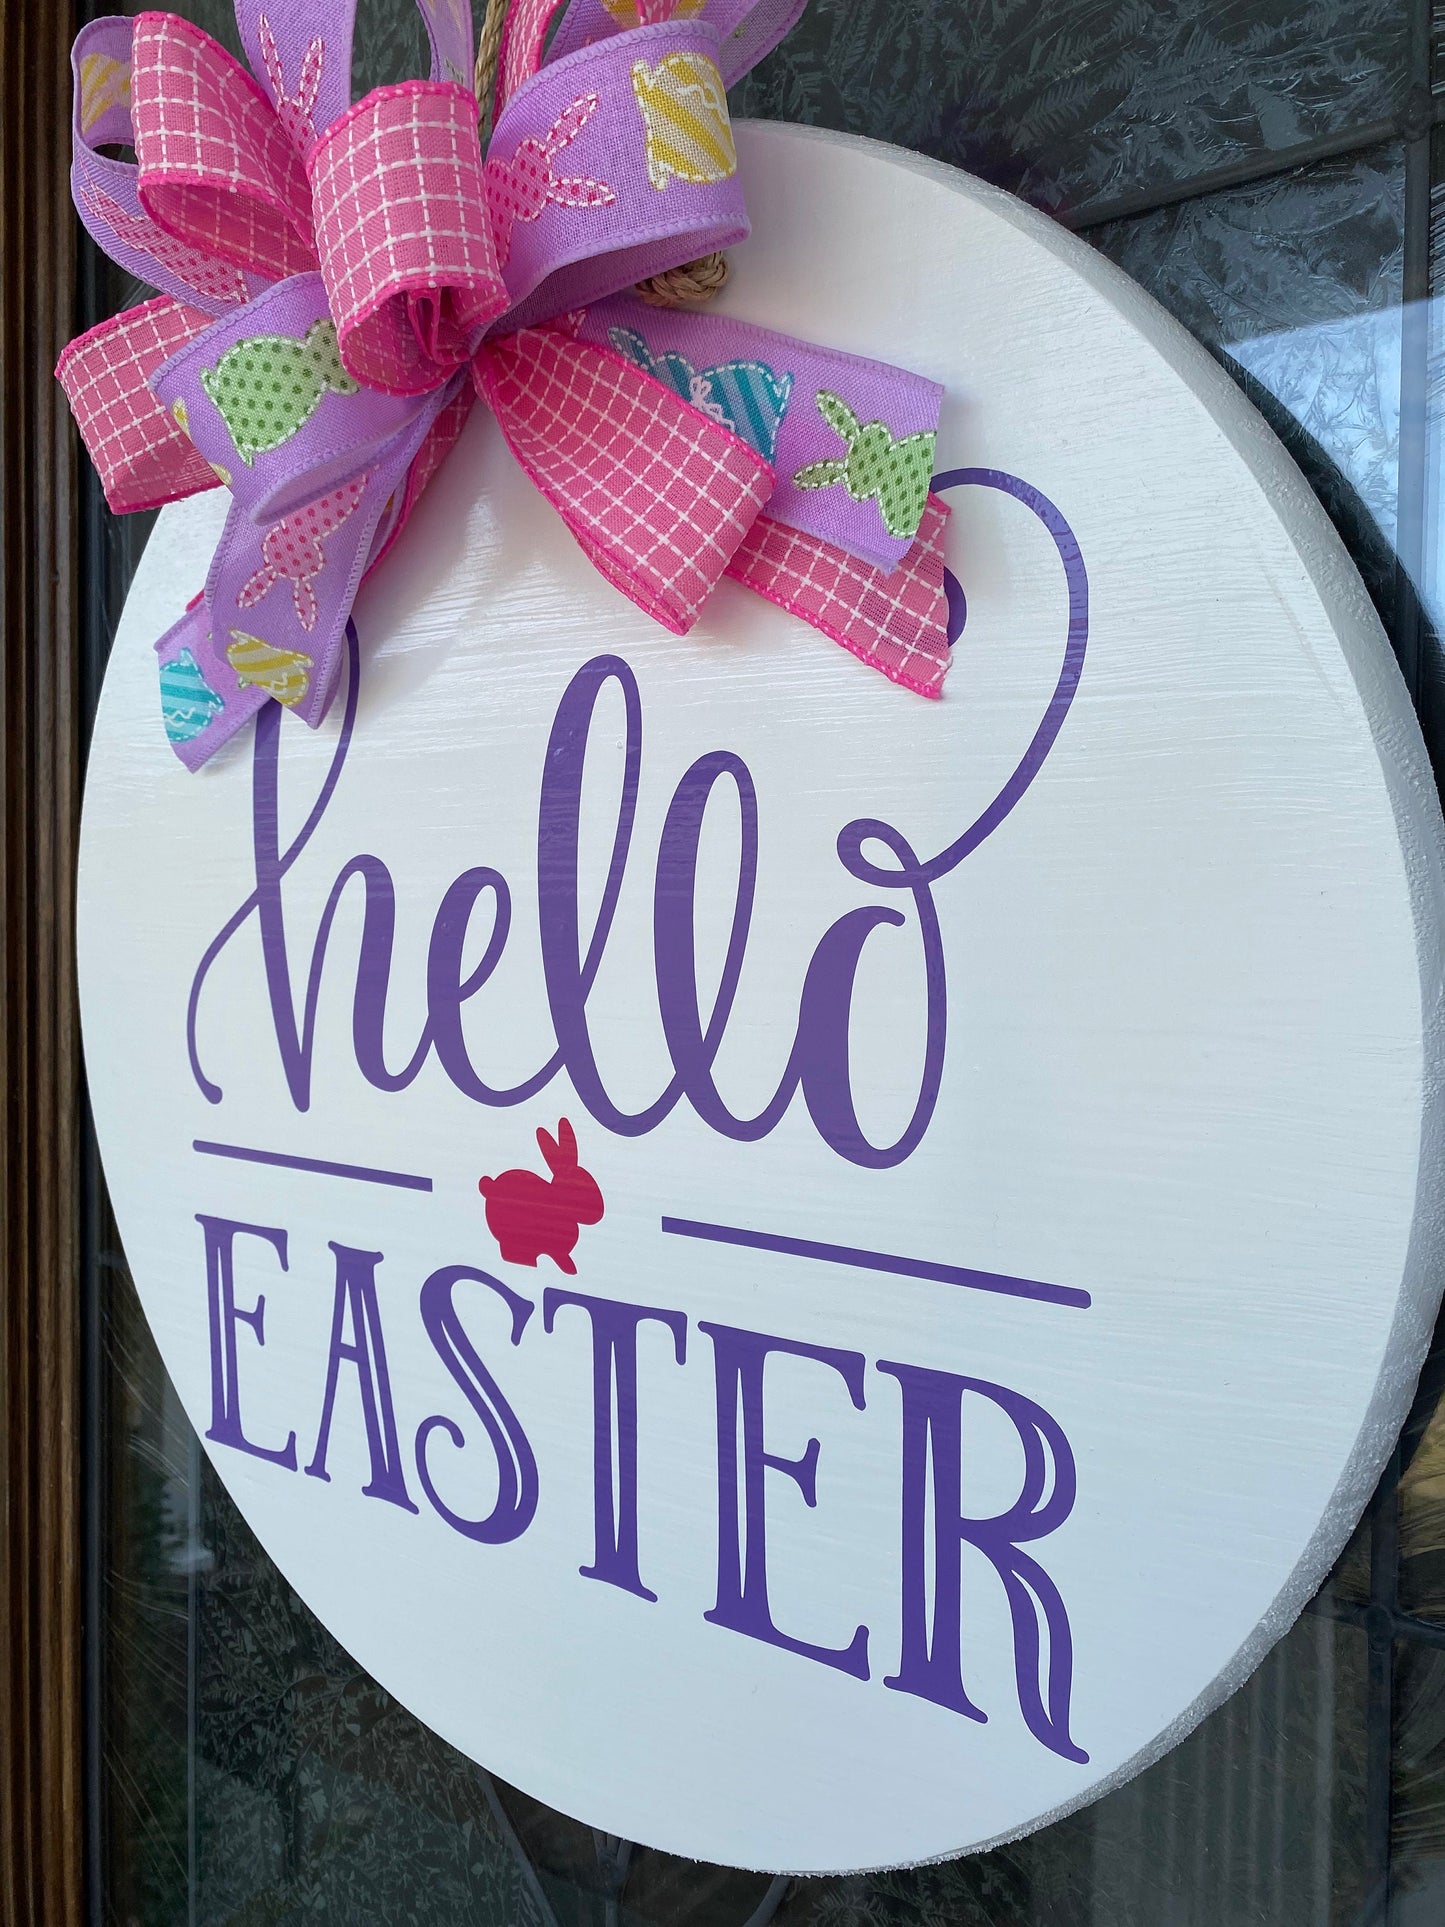 Hello Easter Sign